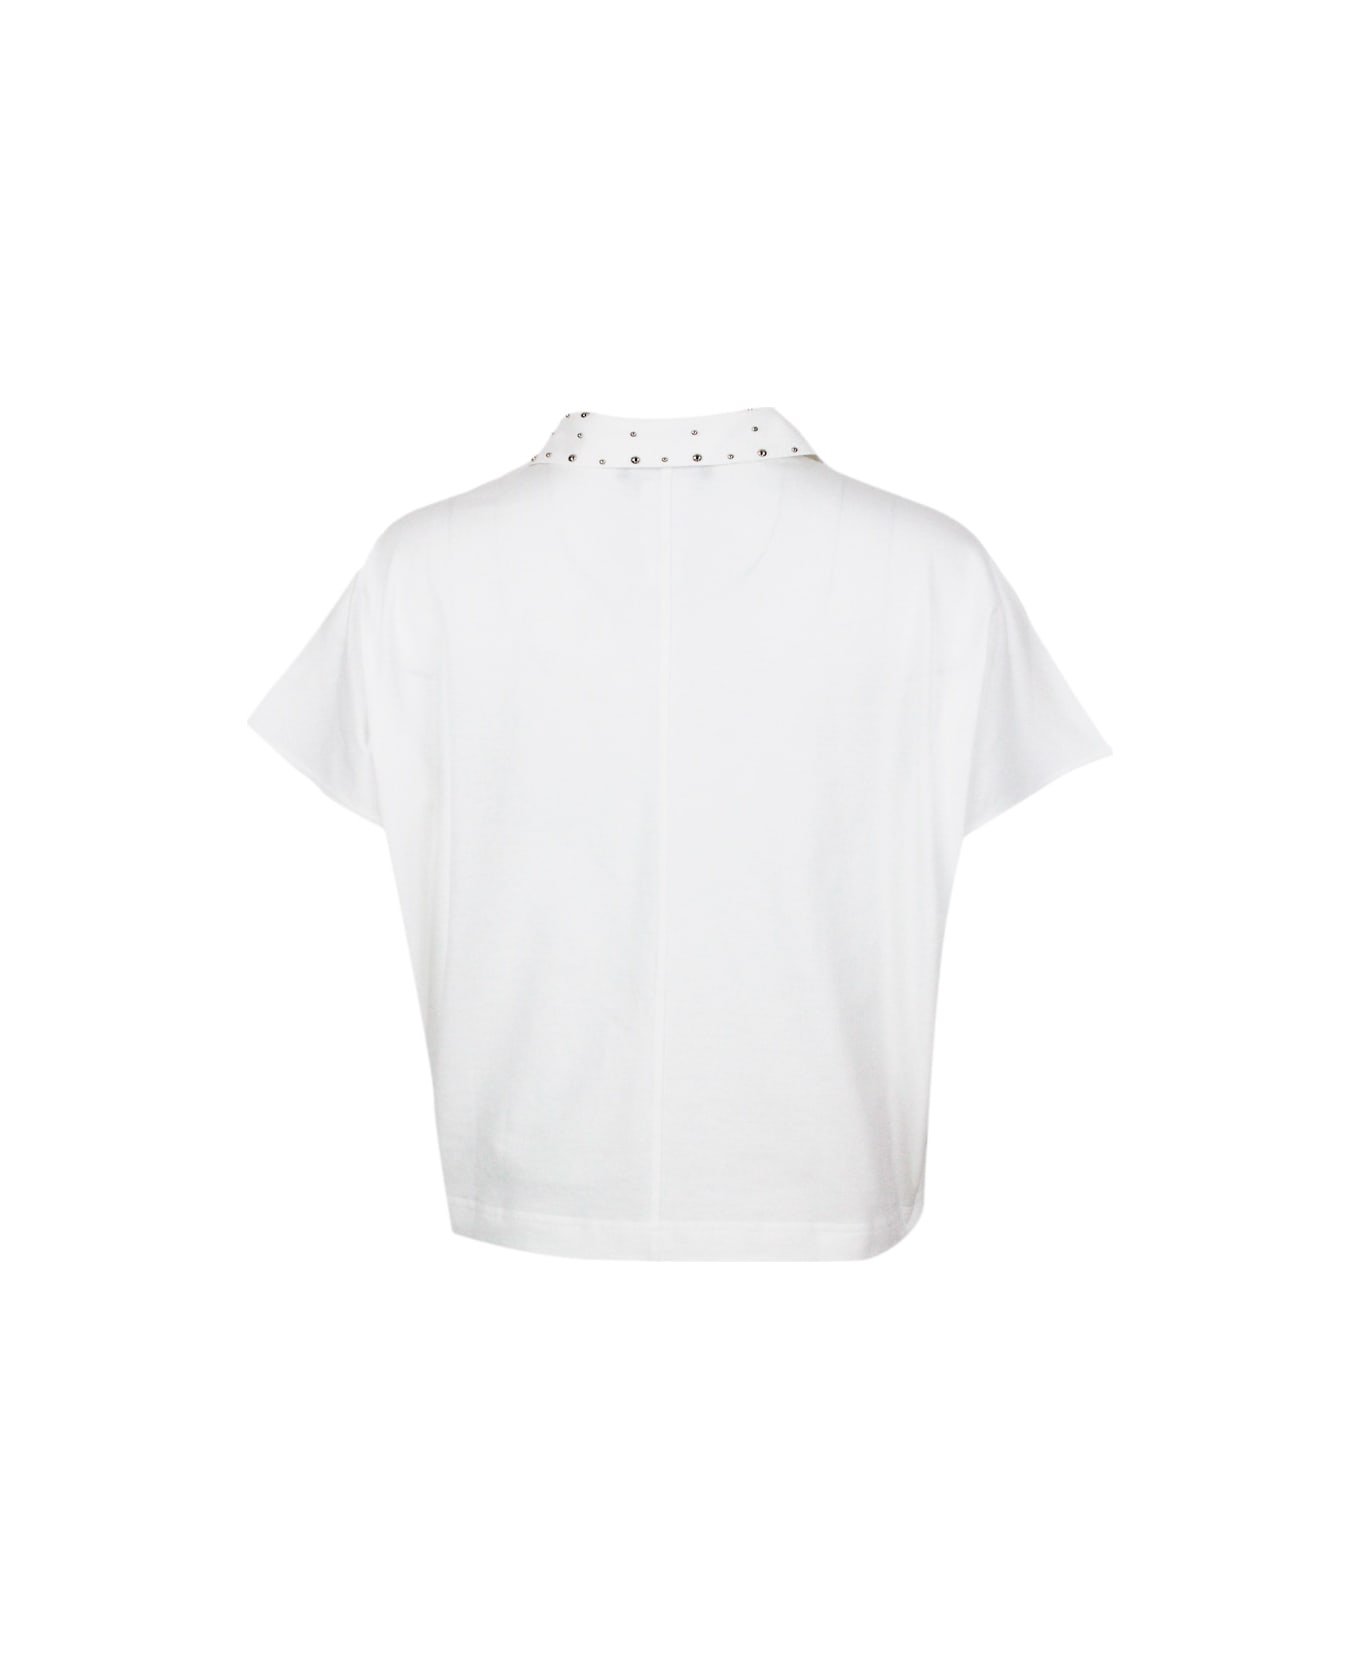 Fabiana Filippi 3-button Short-sleeved Cotton Jersey Polo Shirt Embellished With Studs On The Collar - White ポロシャツ